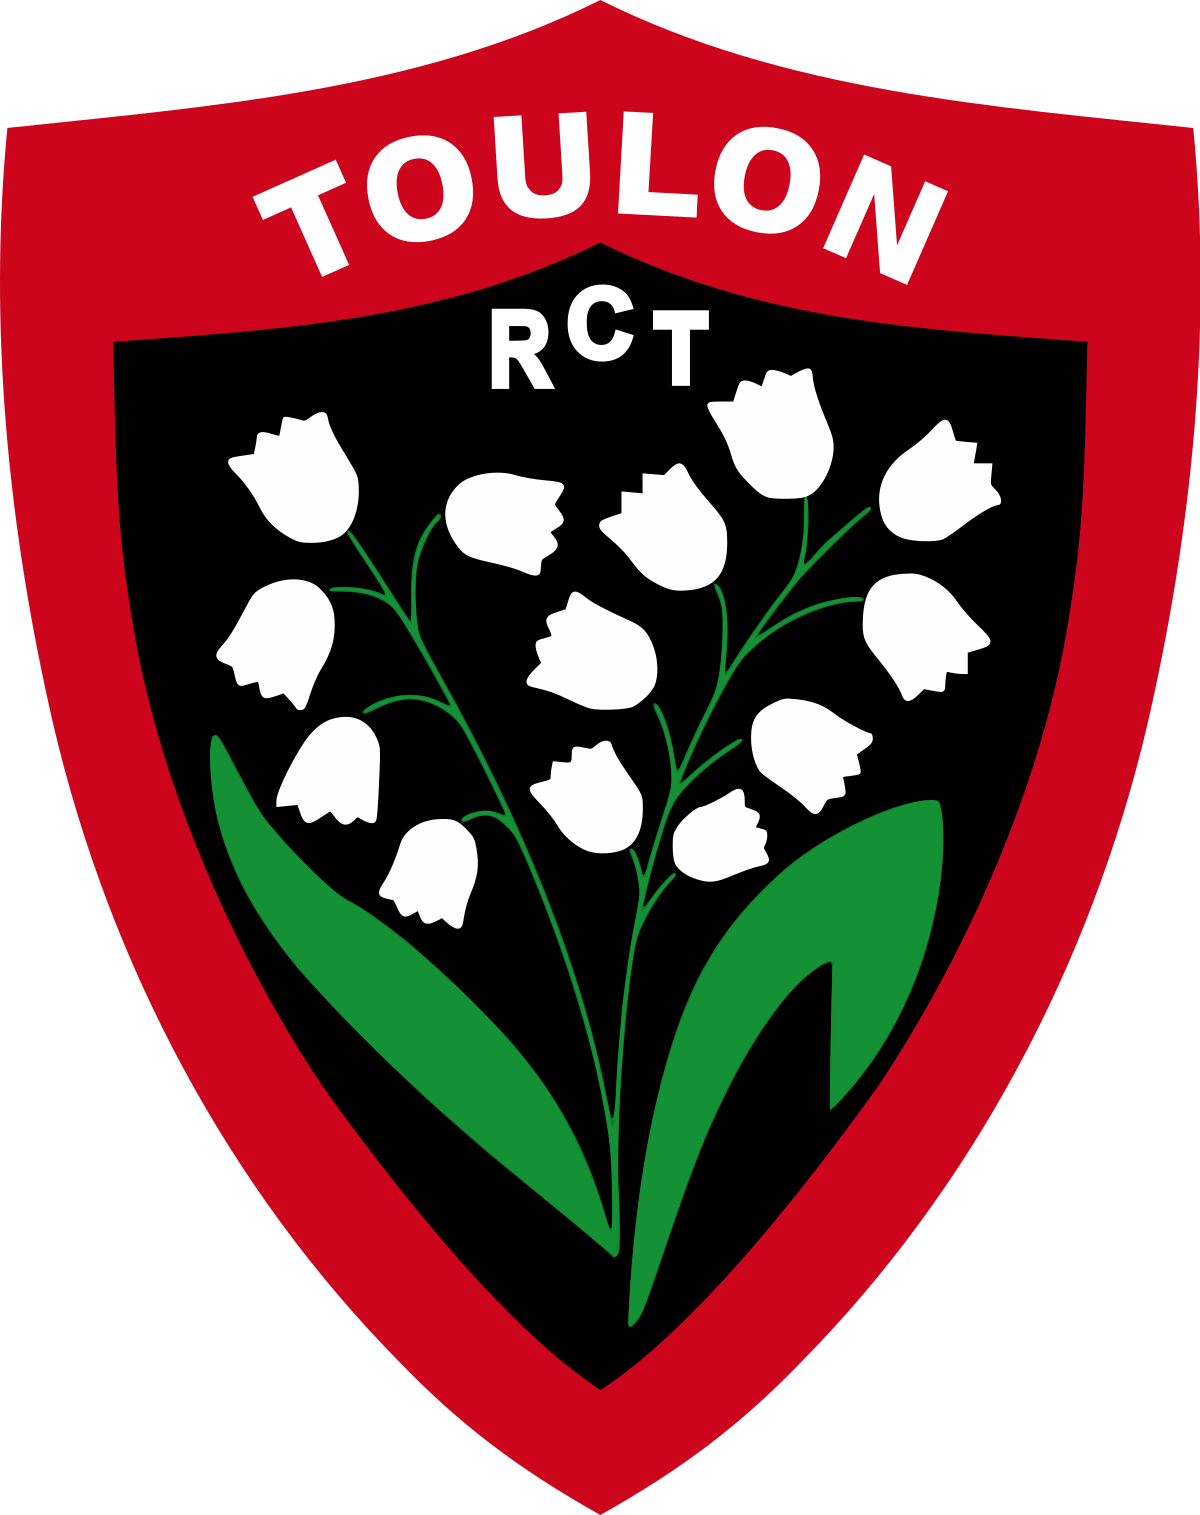 Boutique Rugby Toulon - RCT